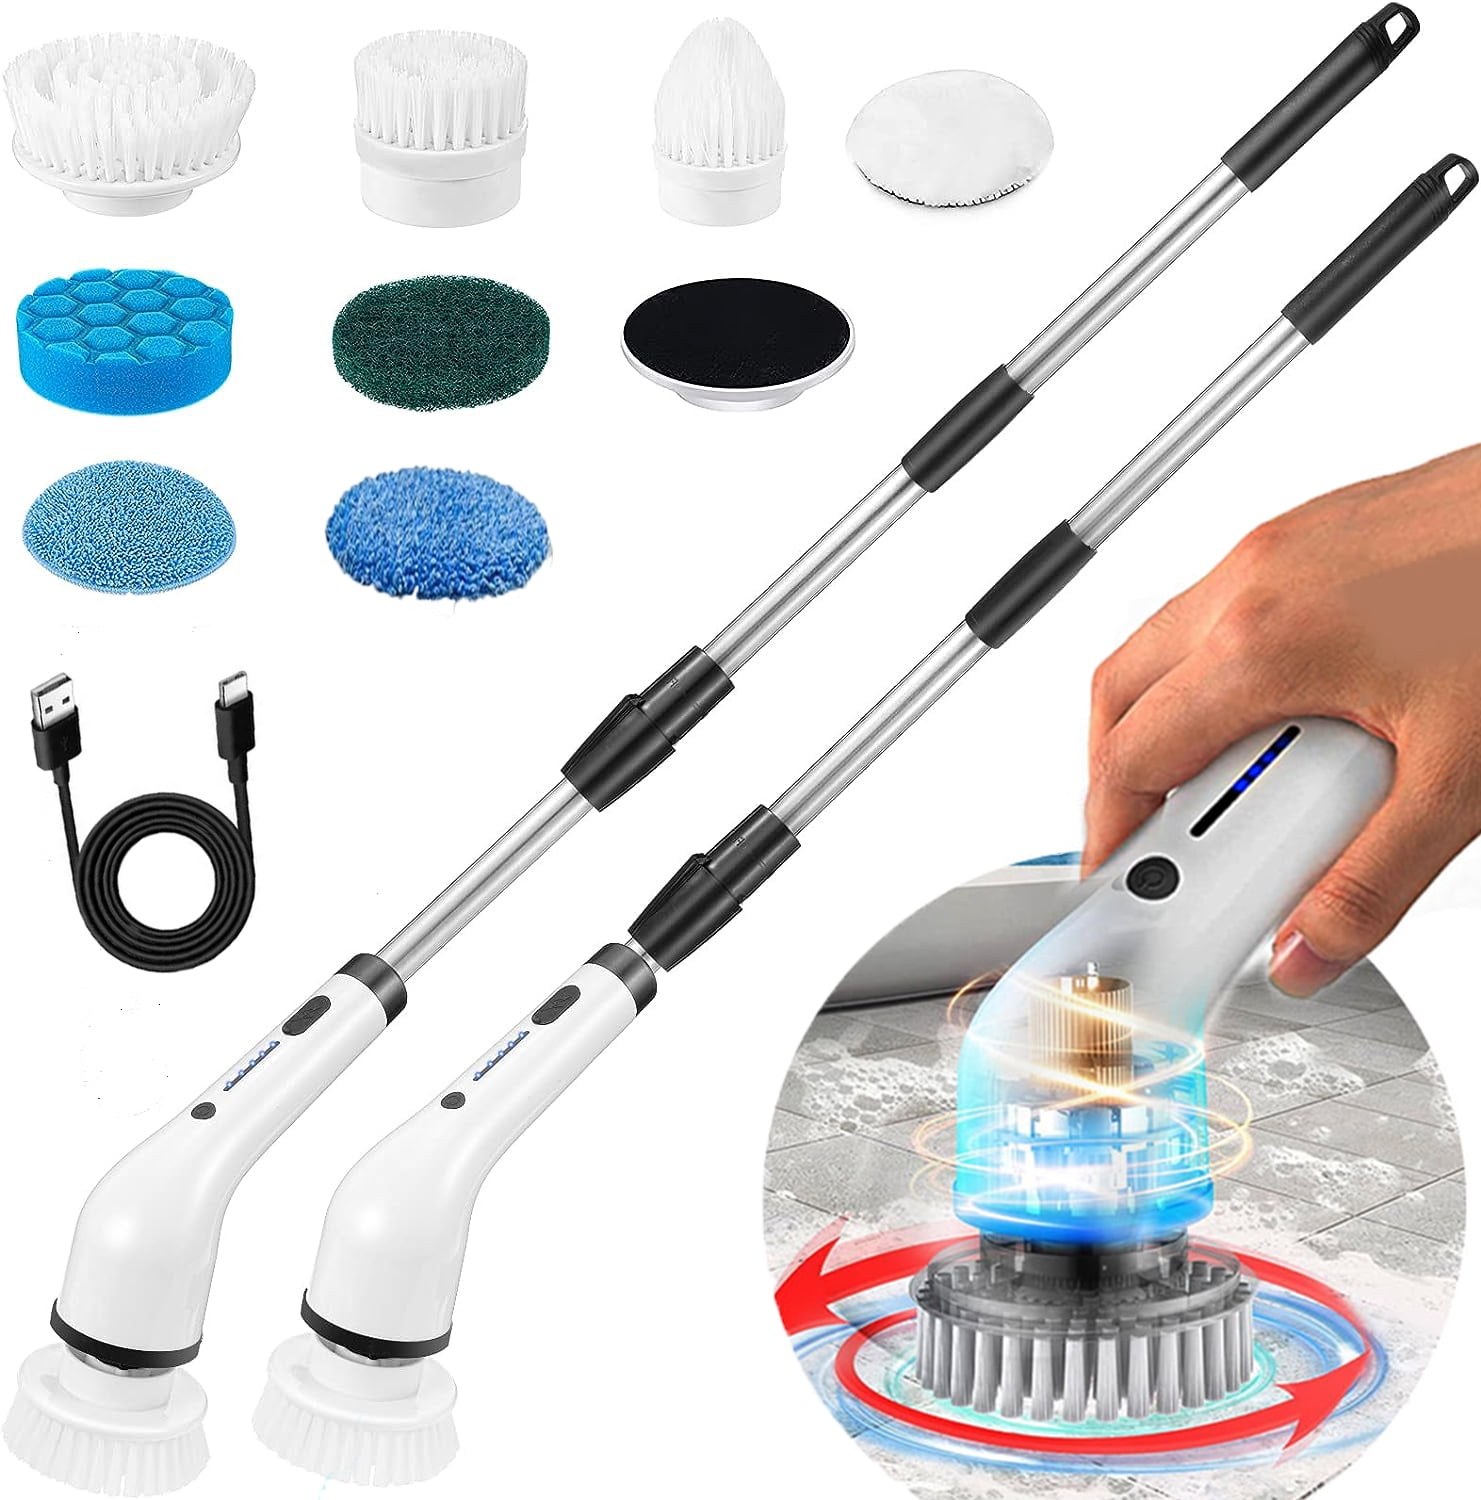 Electric Cleaning Brushes 9 in 1 Household Wireless Rotatable Cleaning  Brush Multifunctional for Bathroom Kitchen Windows Toilet